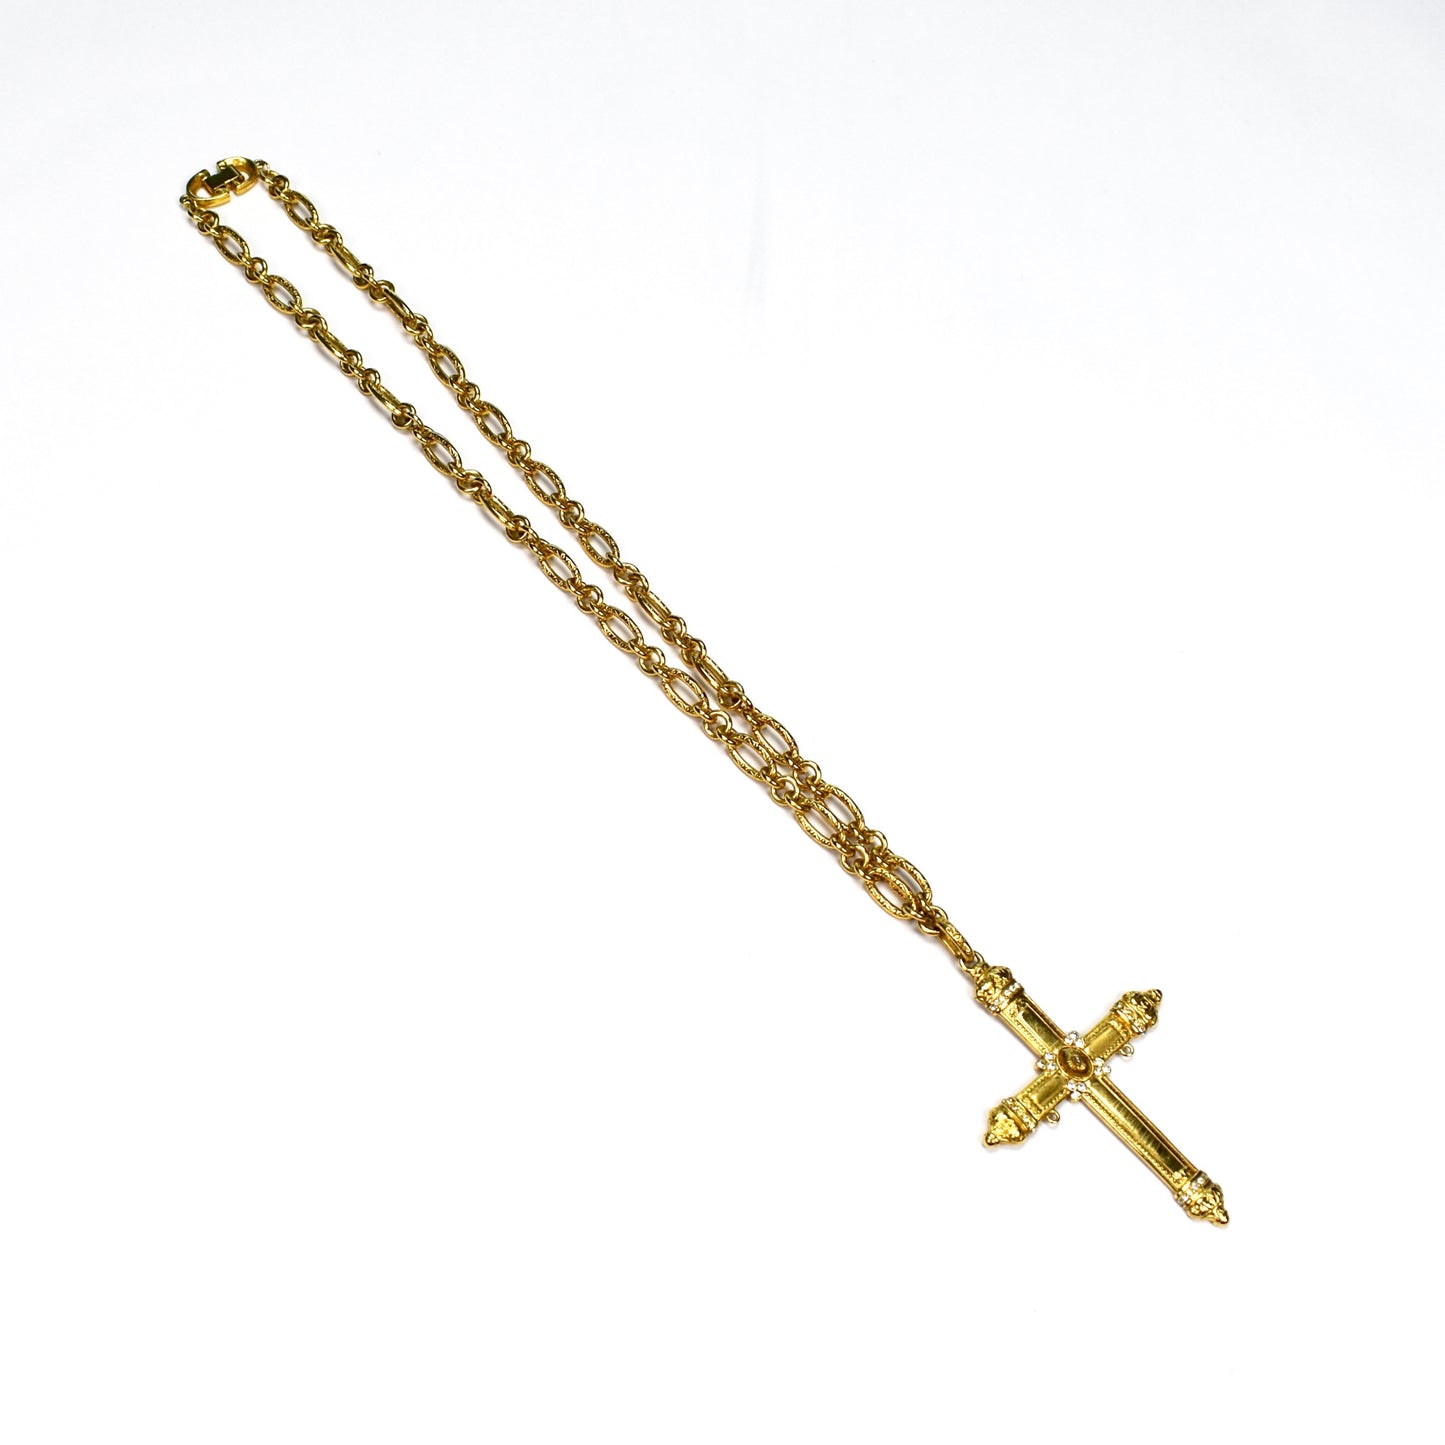 Givenchy - Gold Cross Pendant Necklace